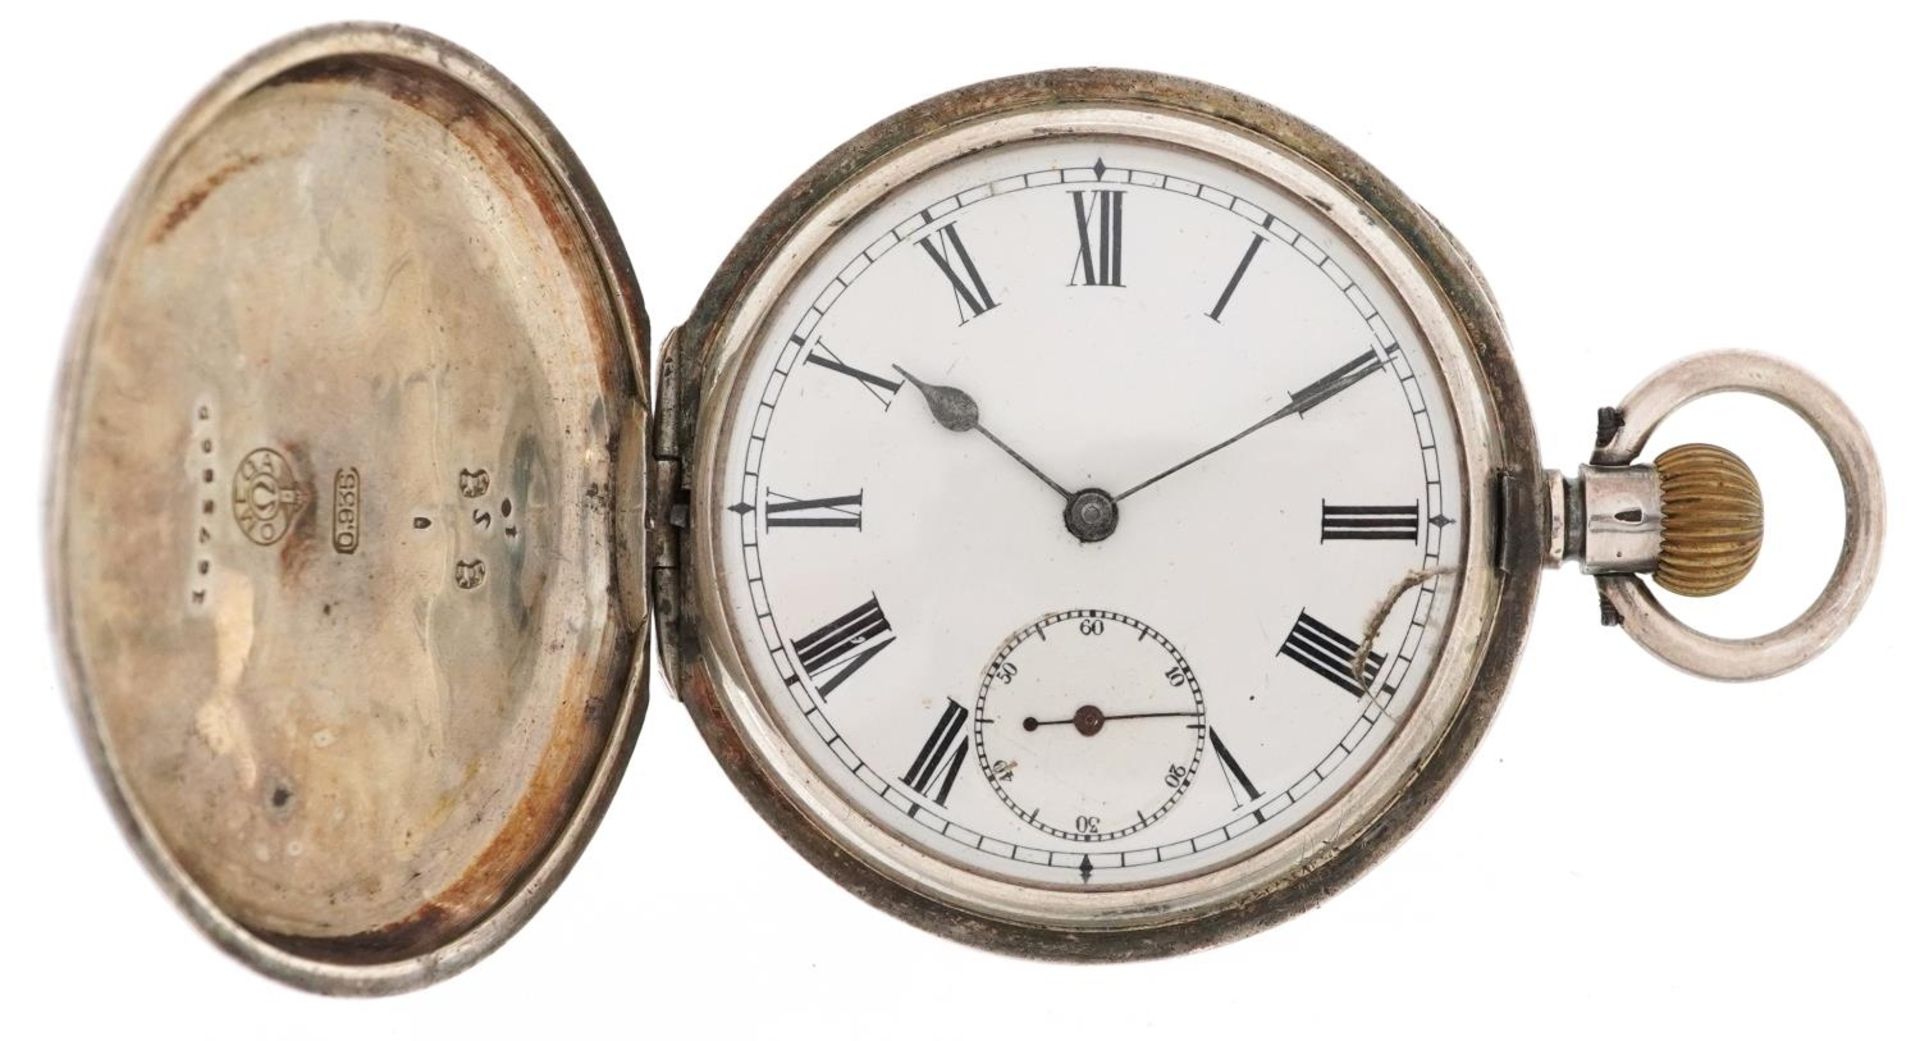 Gentlemen's silver keyless full hunter pocket watch having enamelled and subsidiary dials with Roman